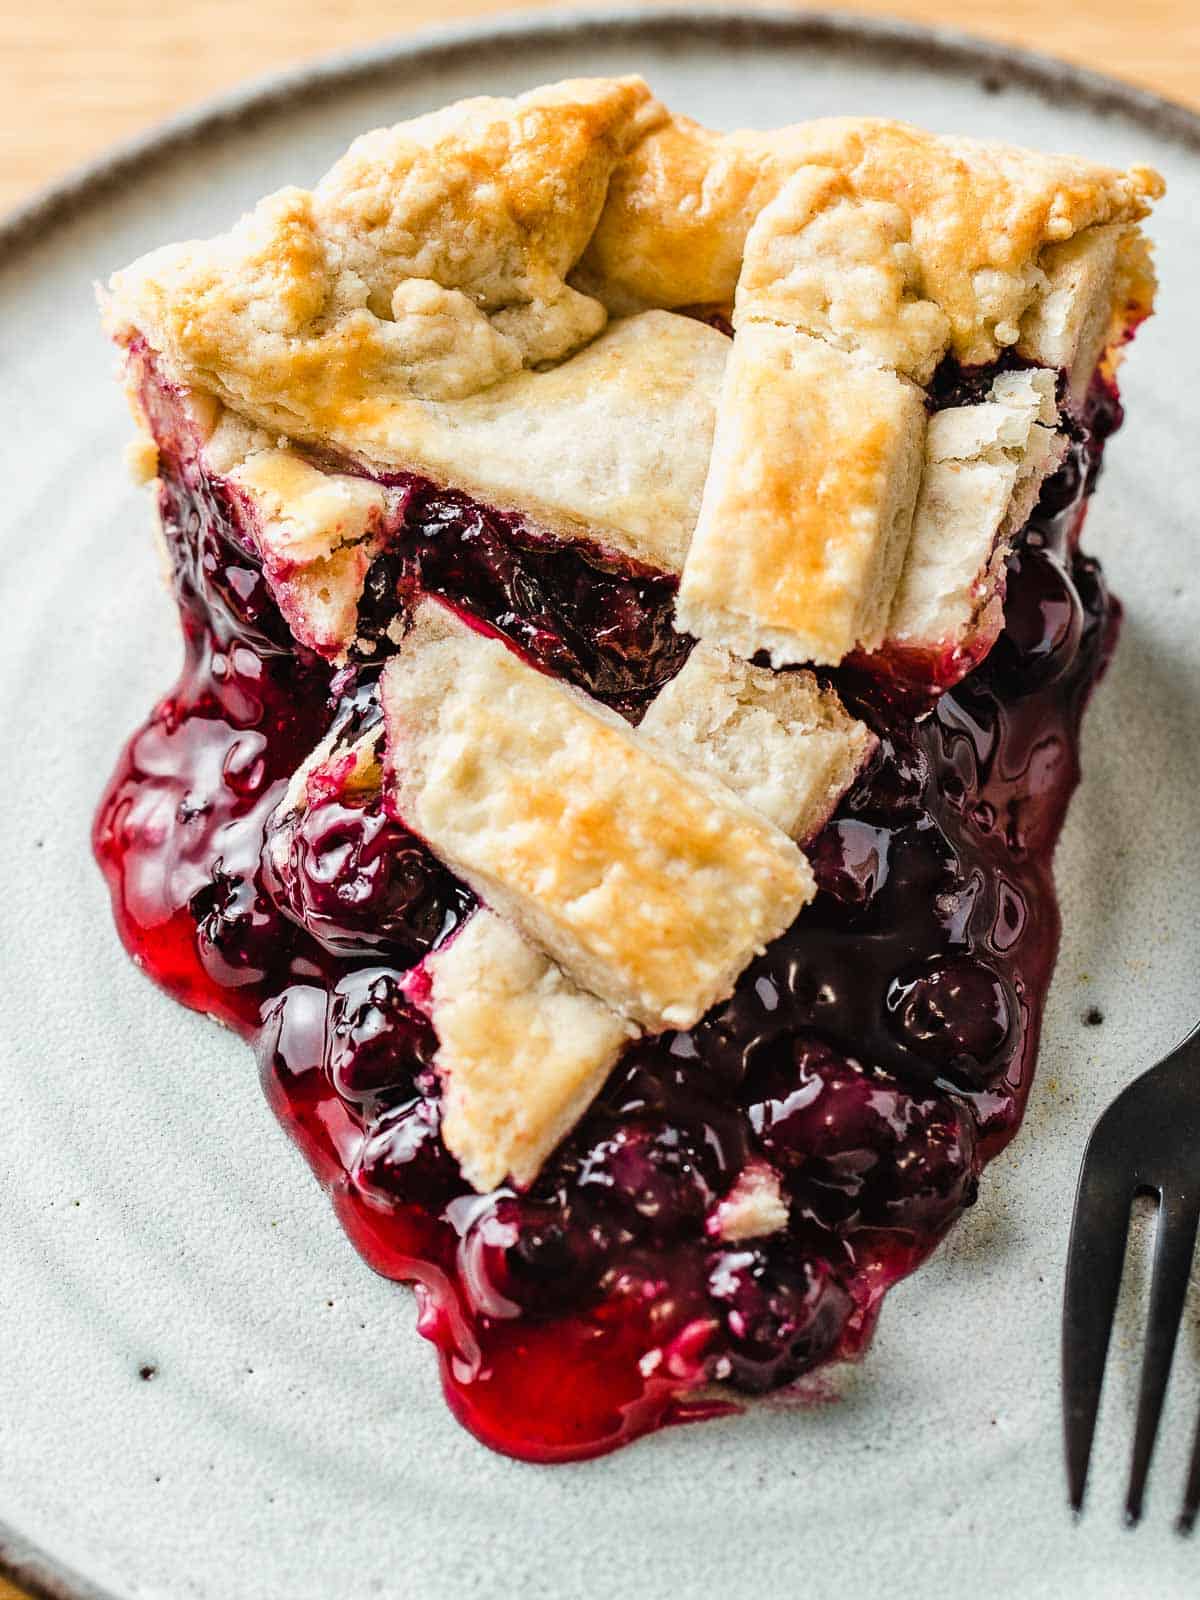 A slice of blueberry pie on a plate with a fork.